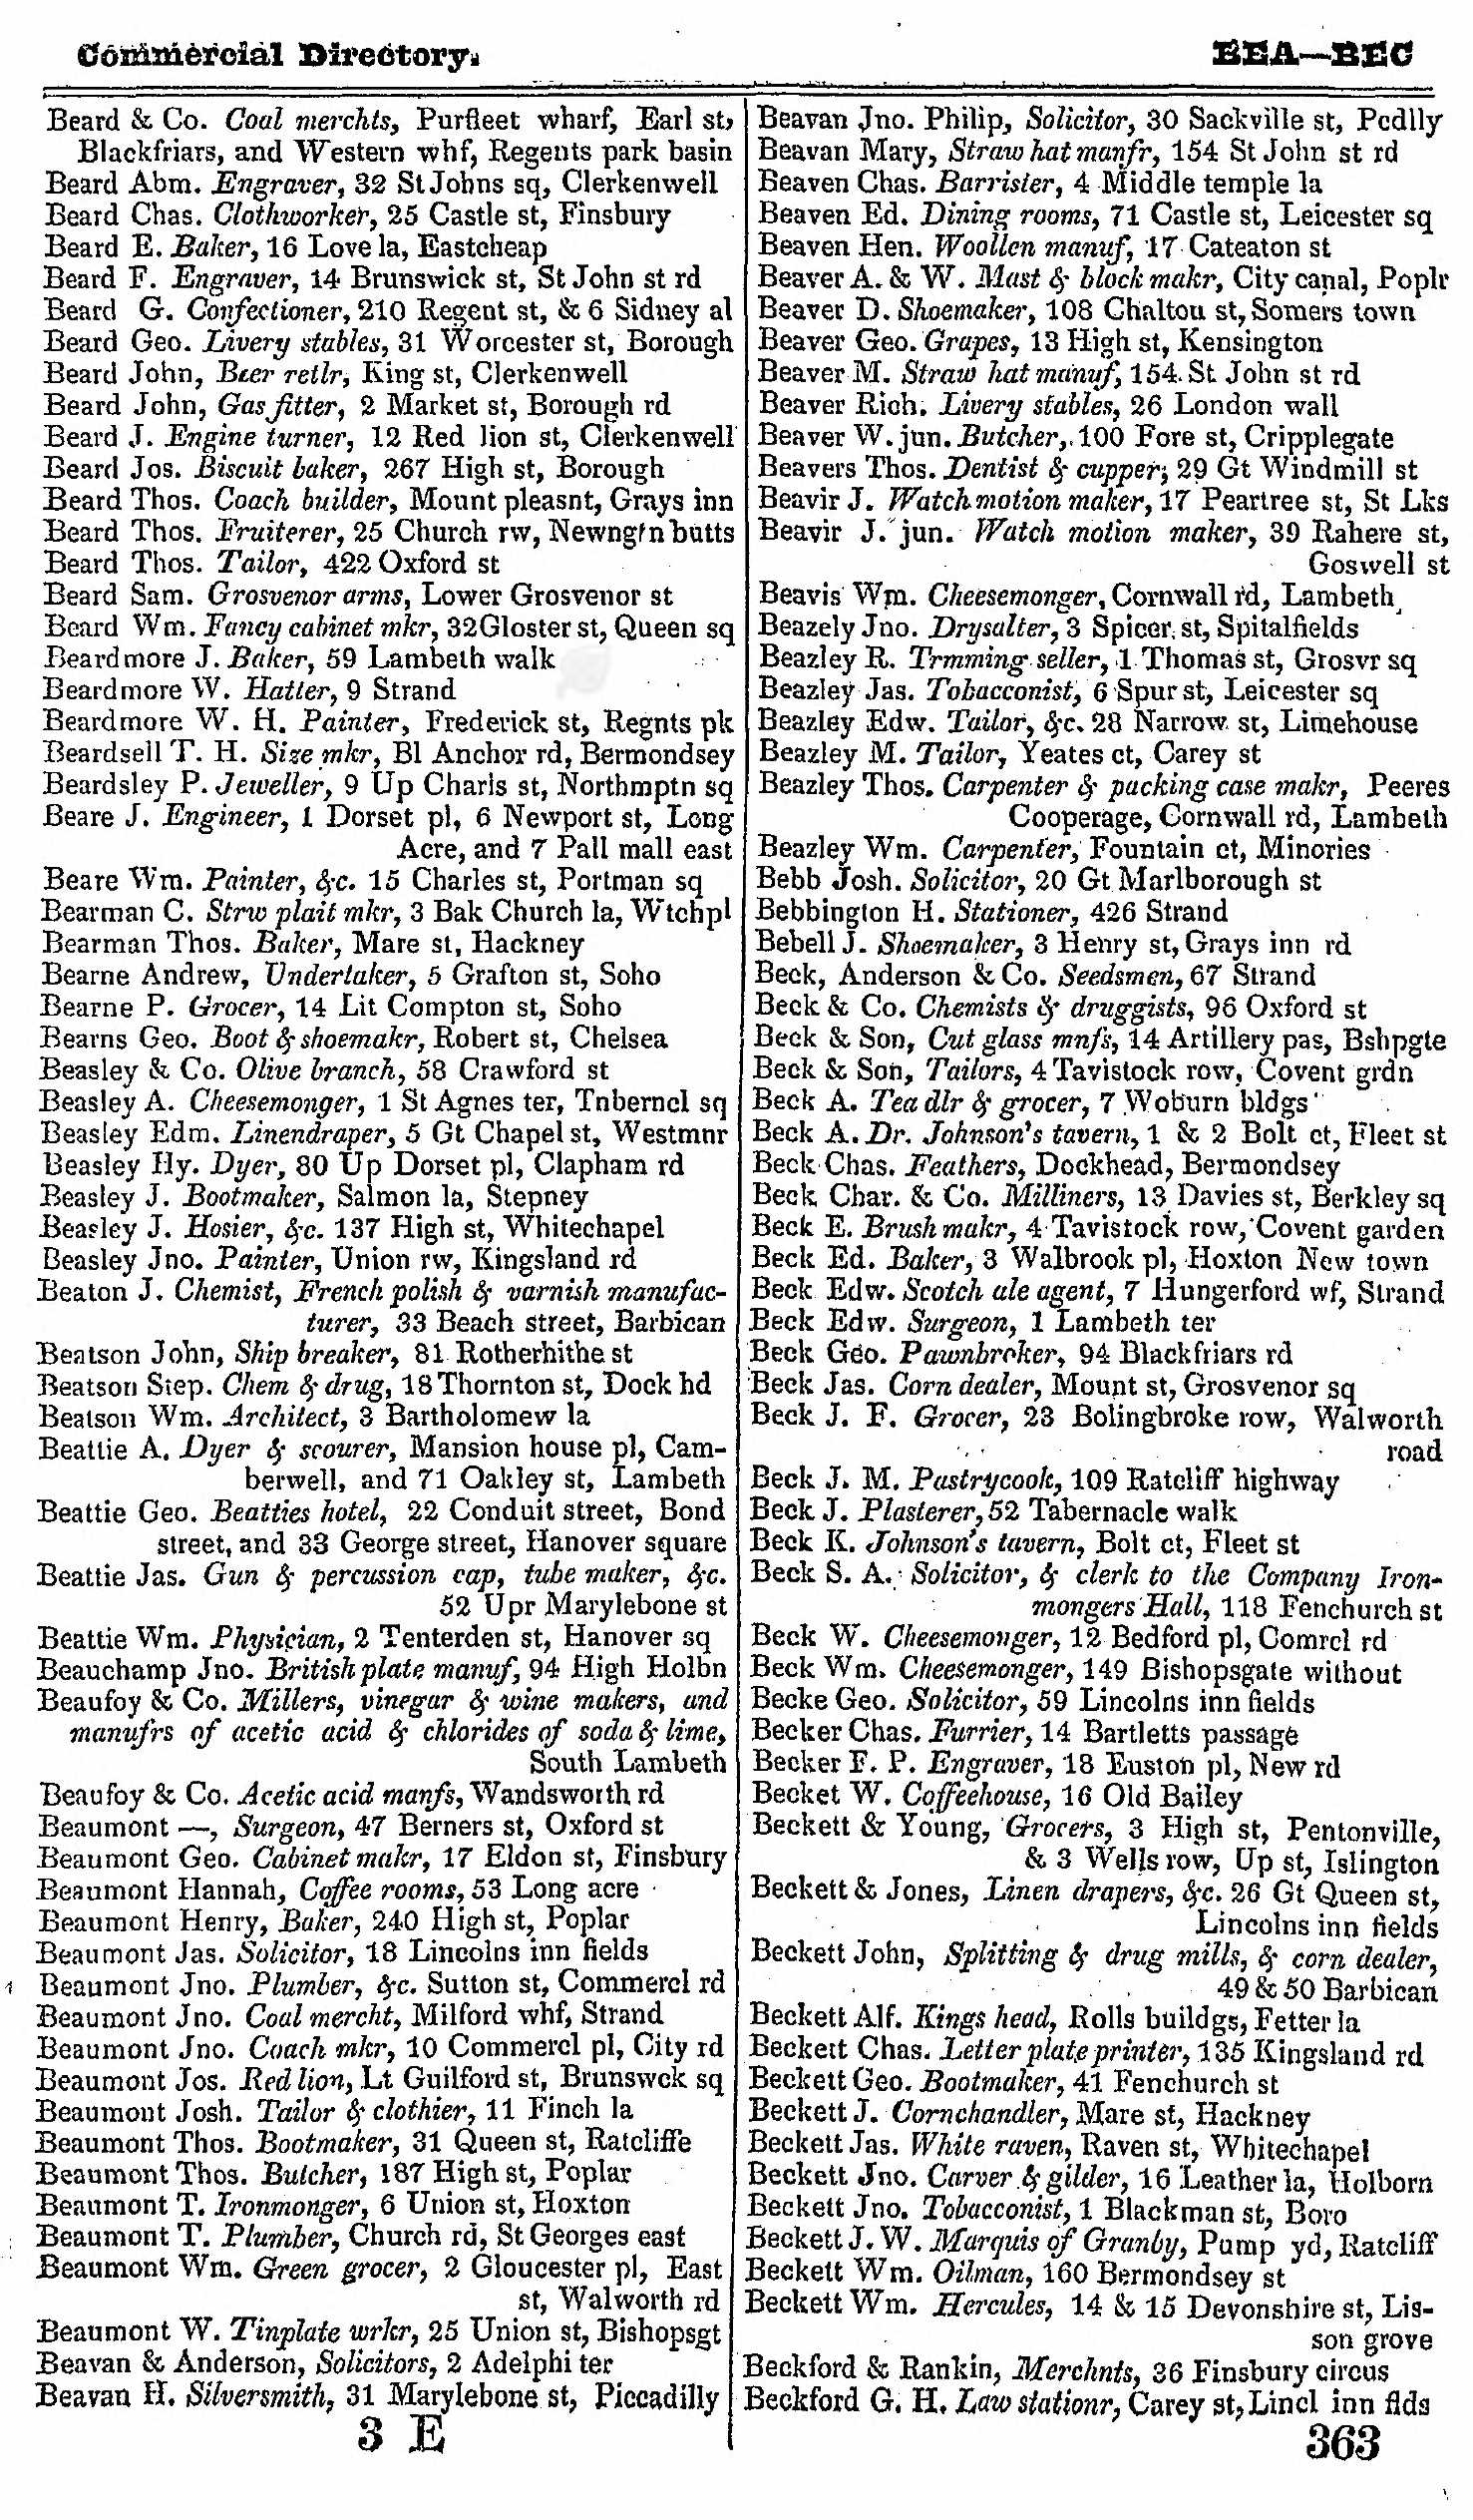 Thomas Bearman listed in 1839 Robson\'s London and Birmingham - Part 1